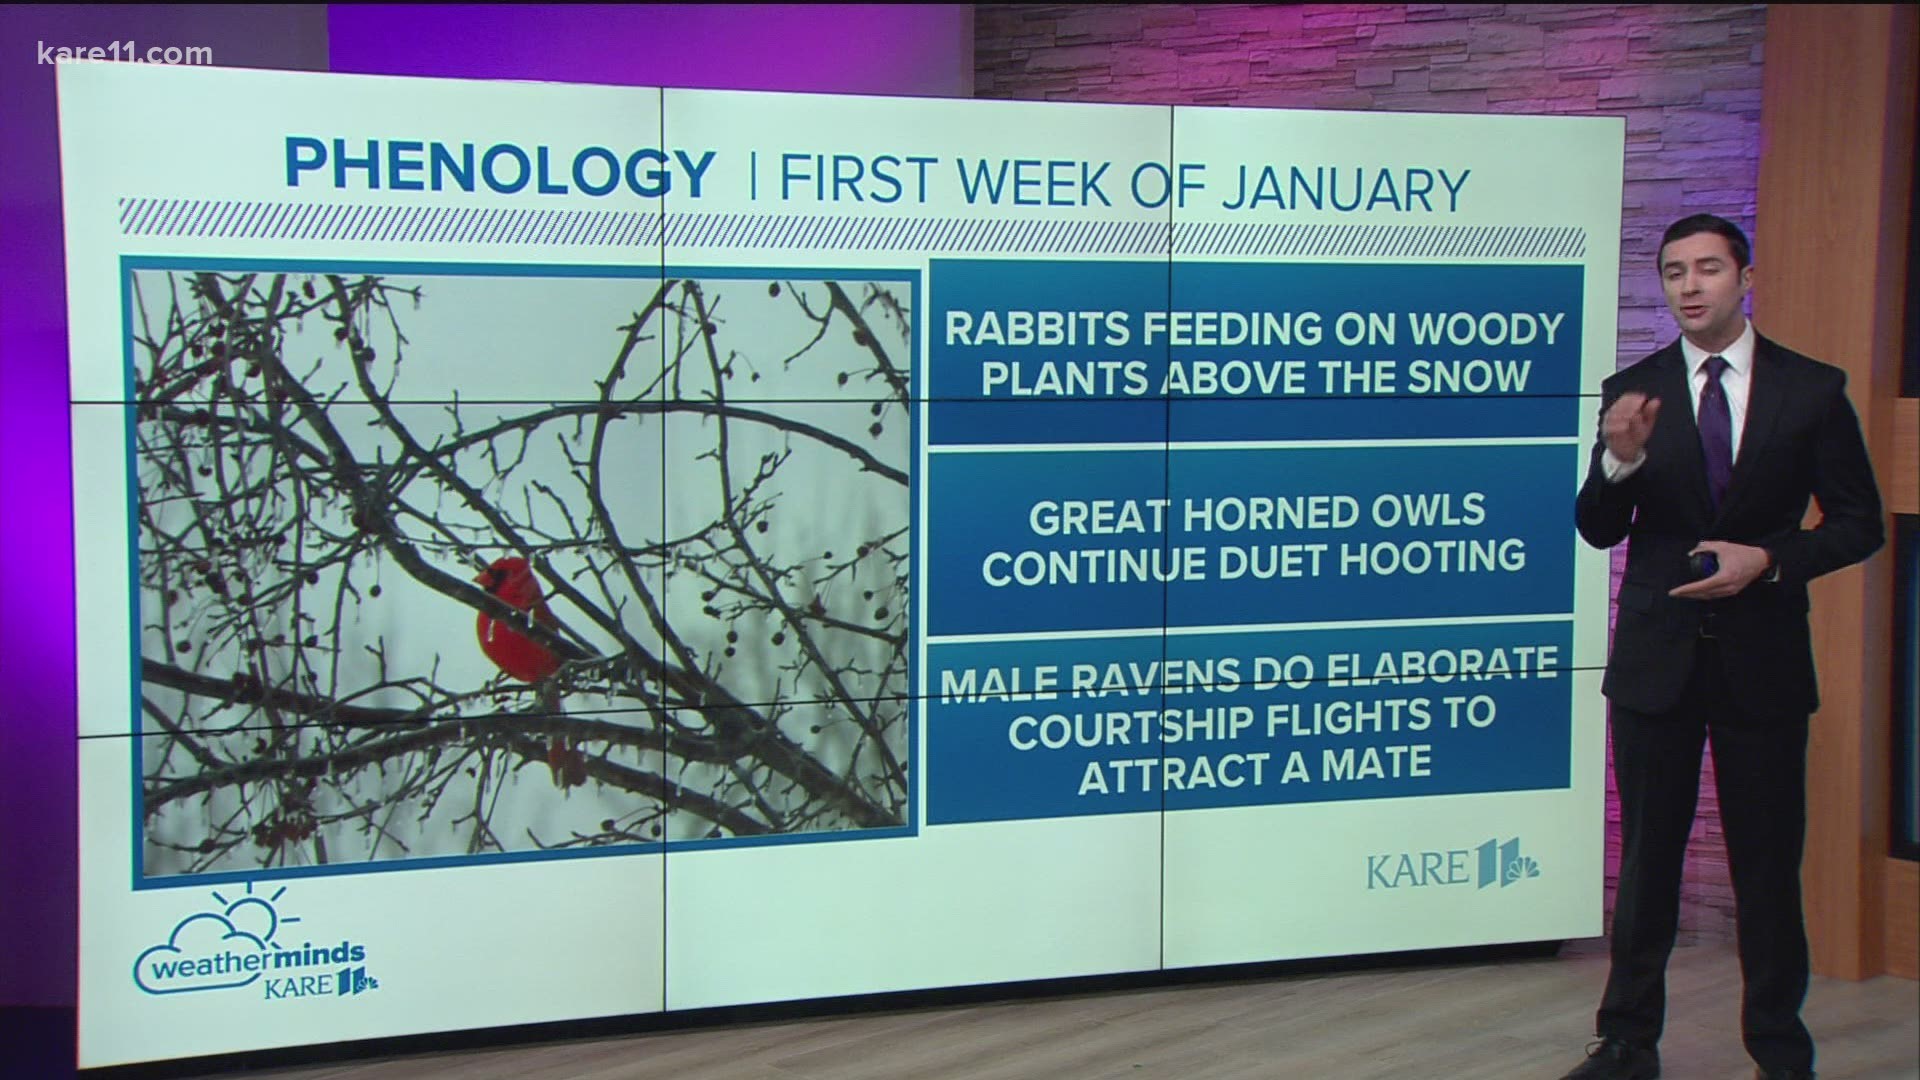 A look at what some of the wildlife around the region are doing in this first week of January.